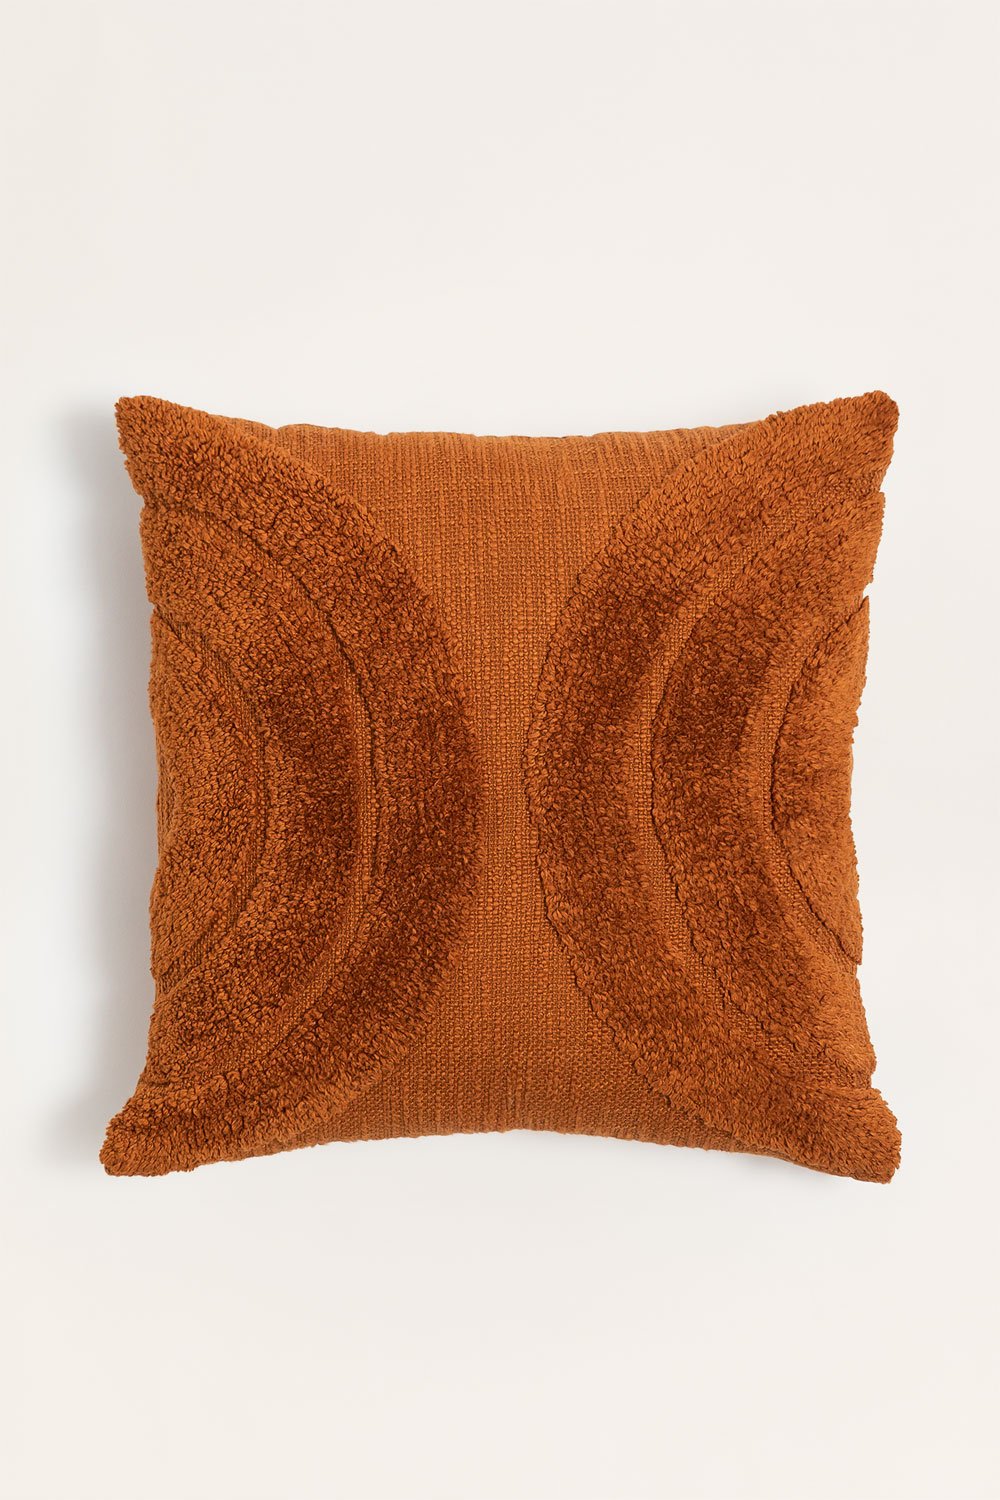 Square Cotton Cushion (45 x 45 cm) Zaylee, gallery image 1